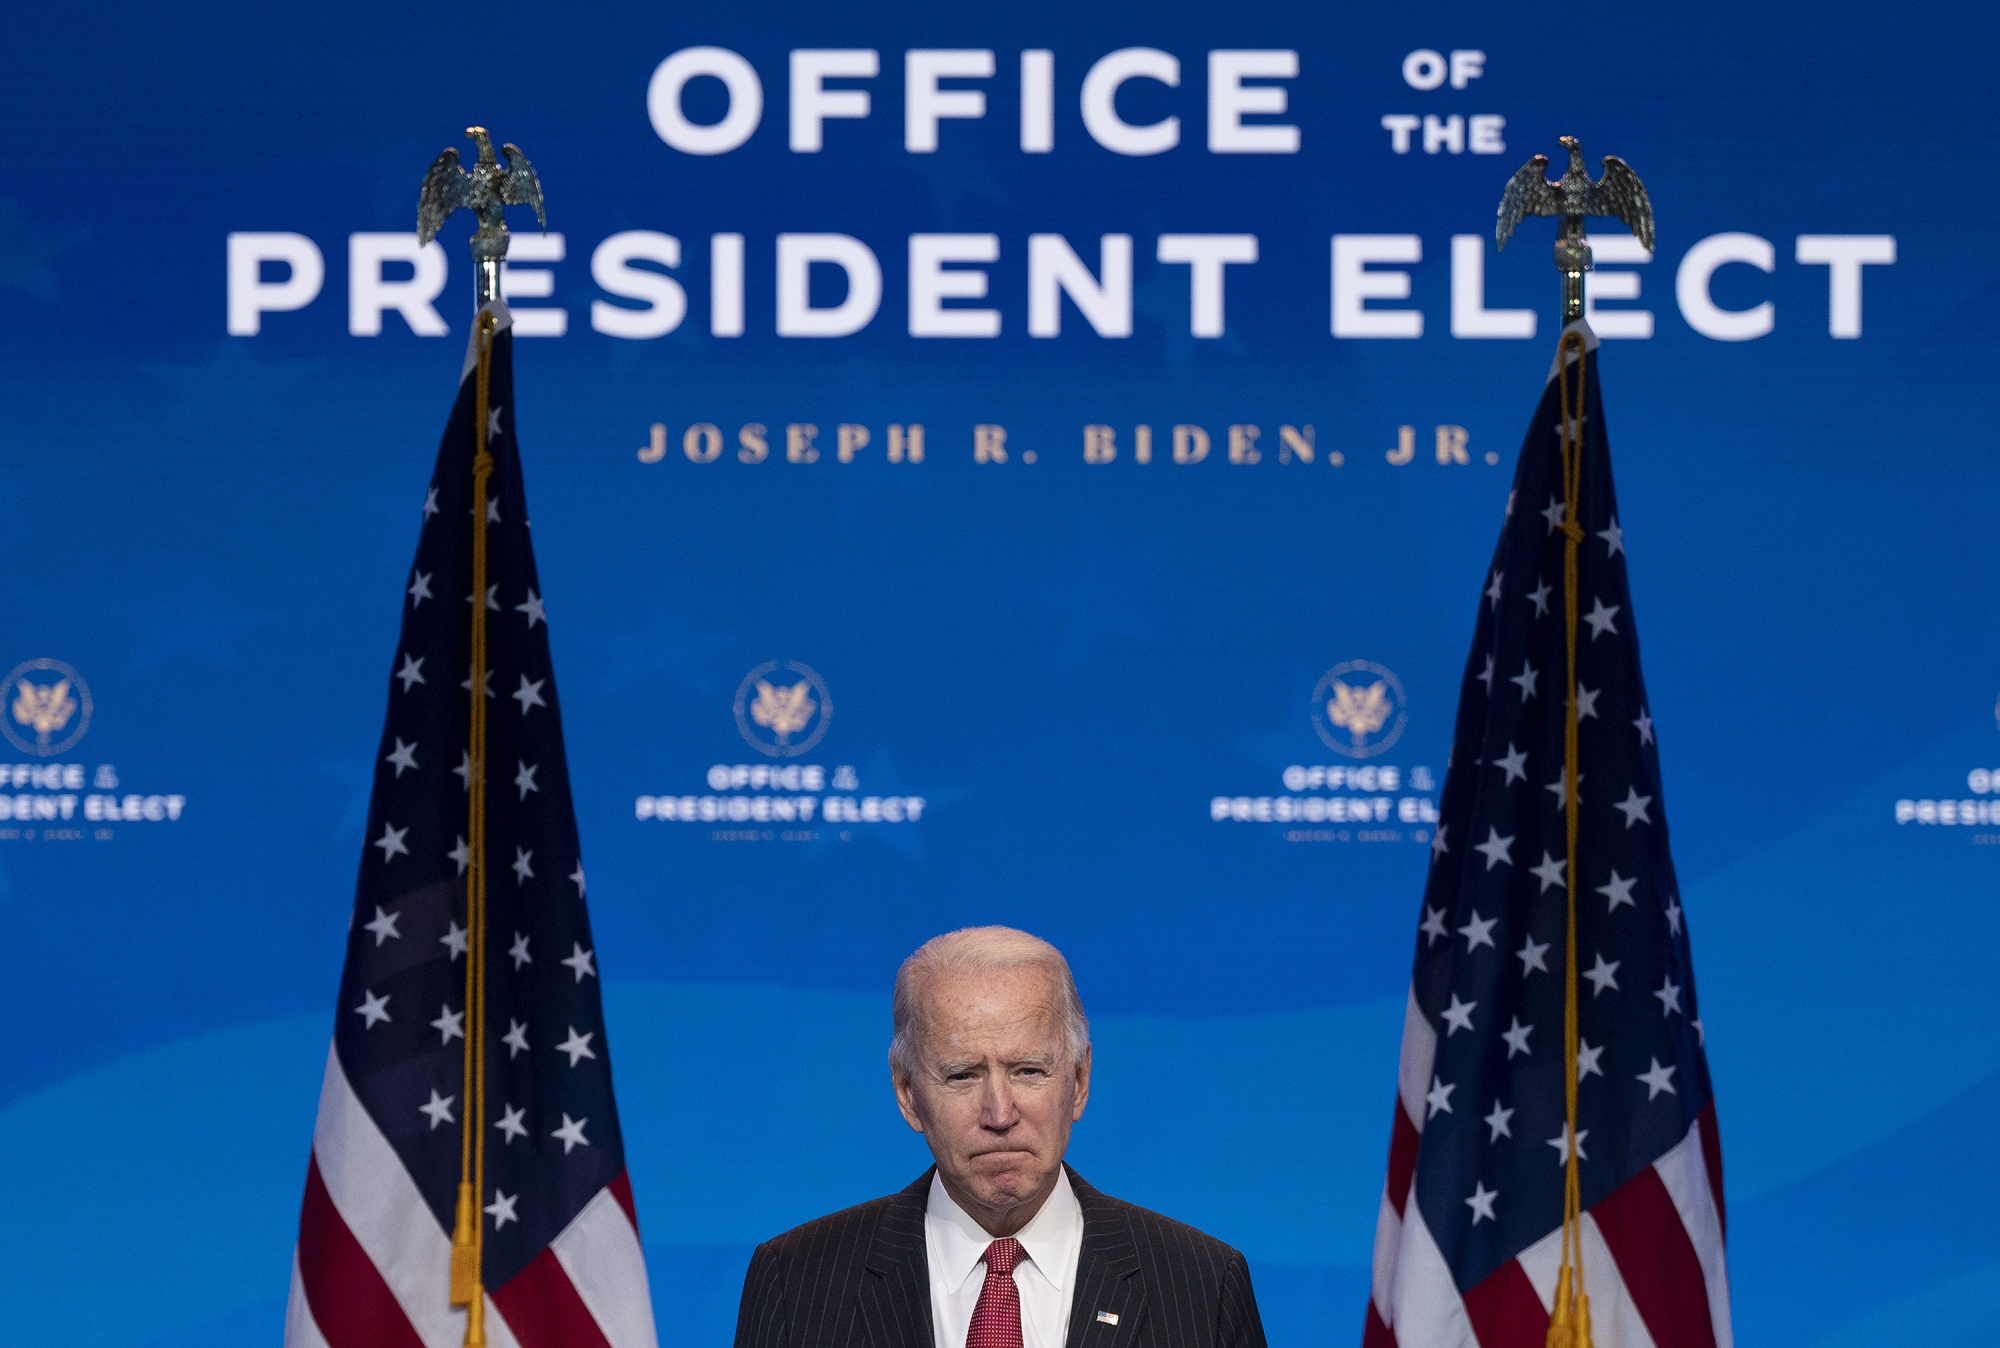 Joe Biden will be sworn in as the oldest president in the nation’s history.